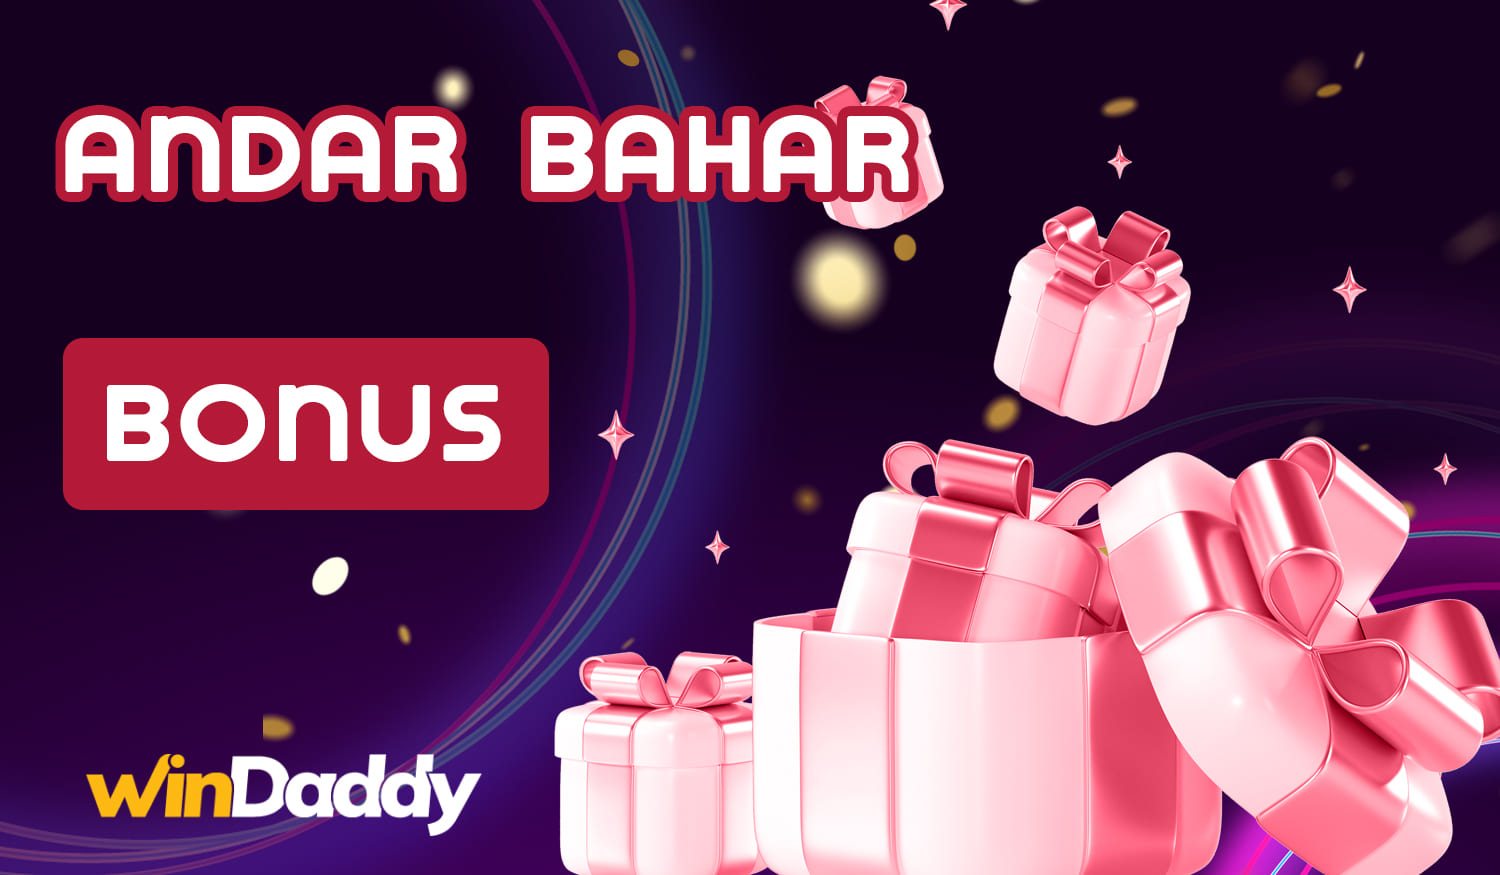 Table with available bonuses on Windaddy for Indian users